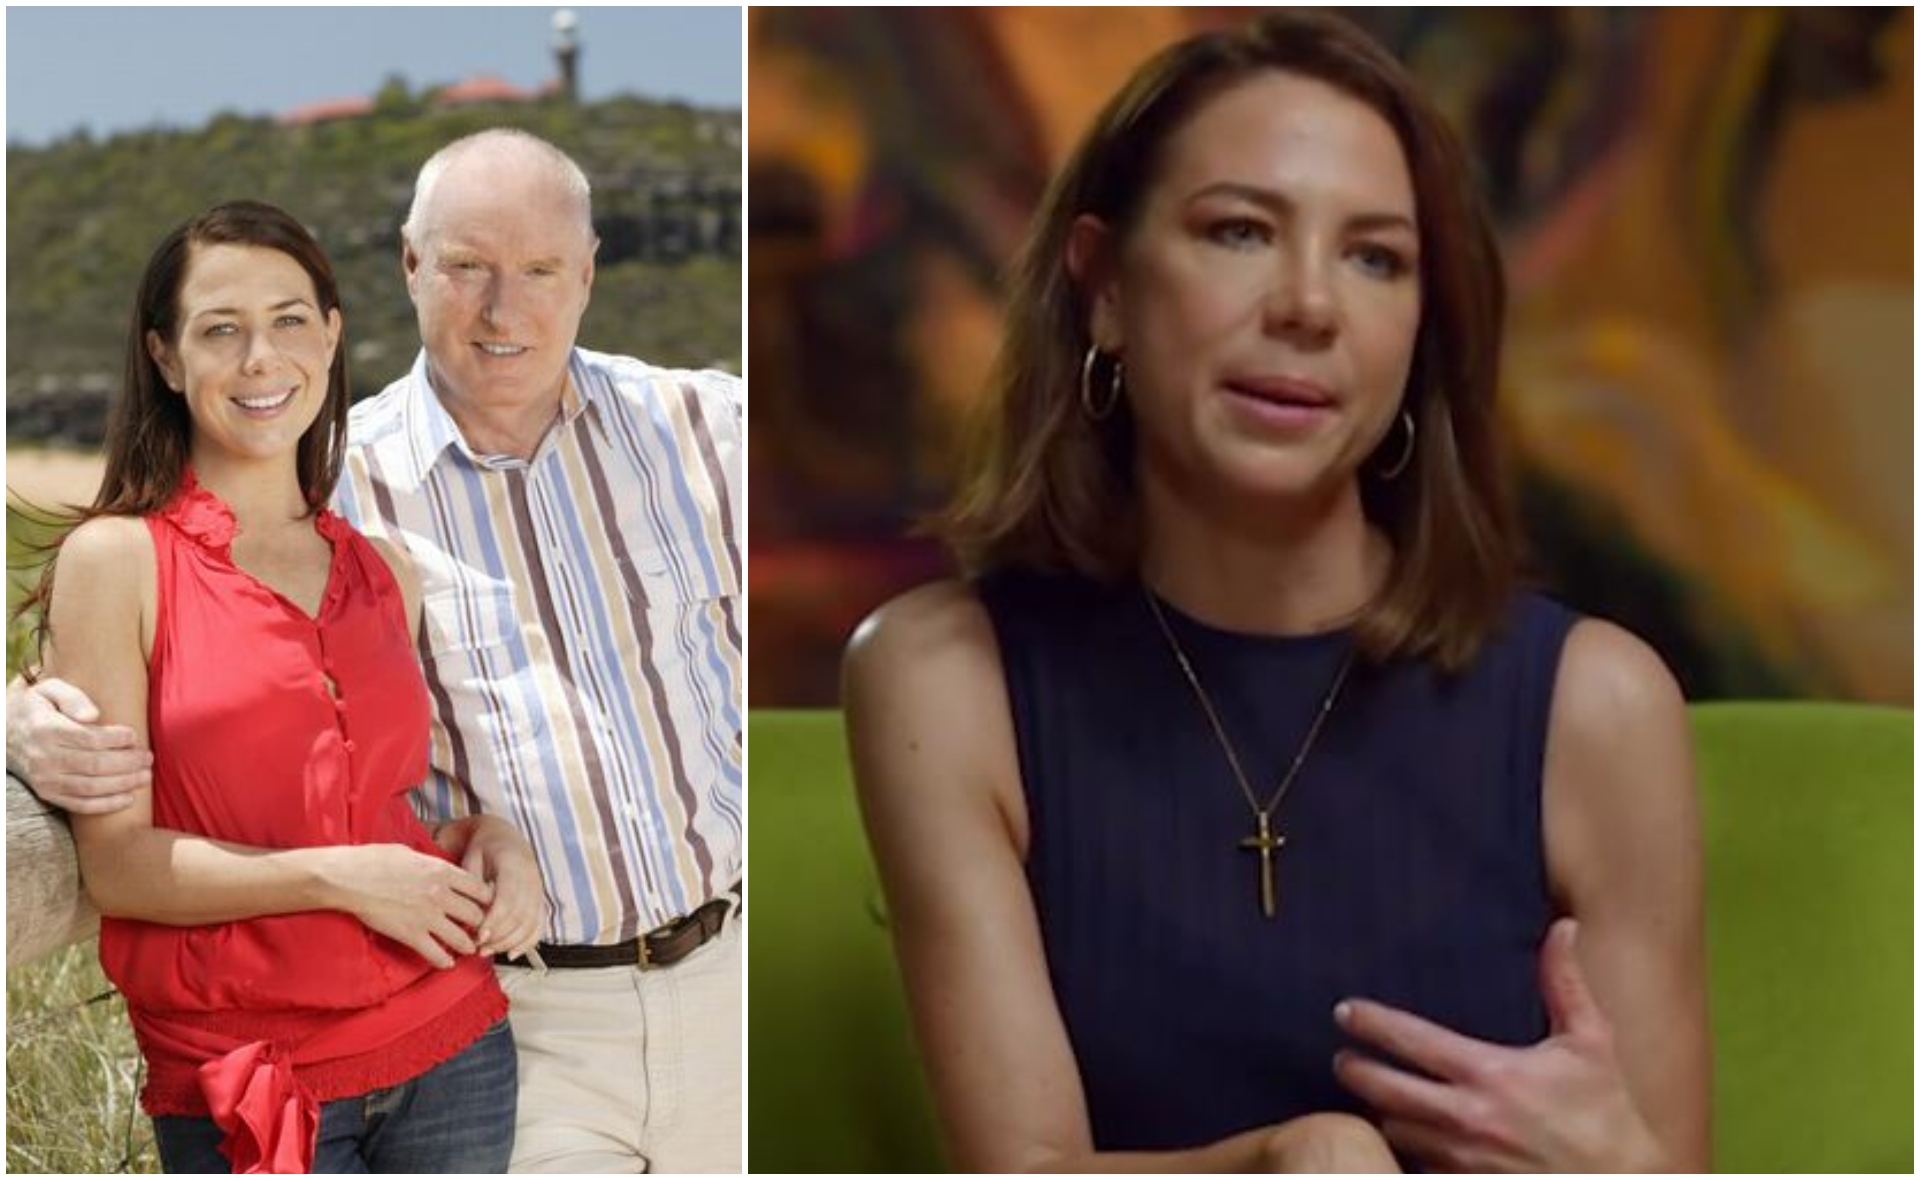 “I was lost”: Kate Ritchie reveals the one, beautiful thing that saved her after her after leaving Home & Away